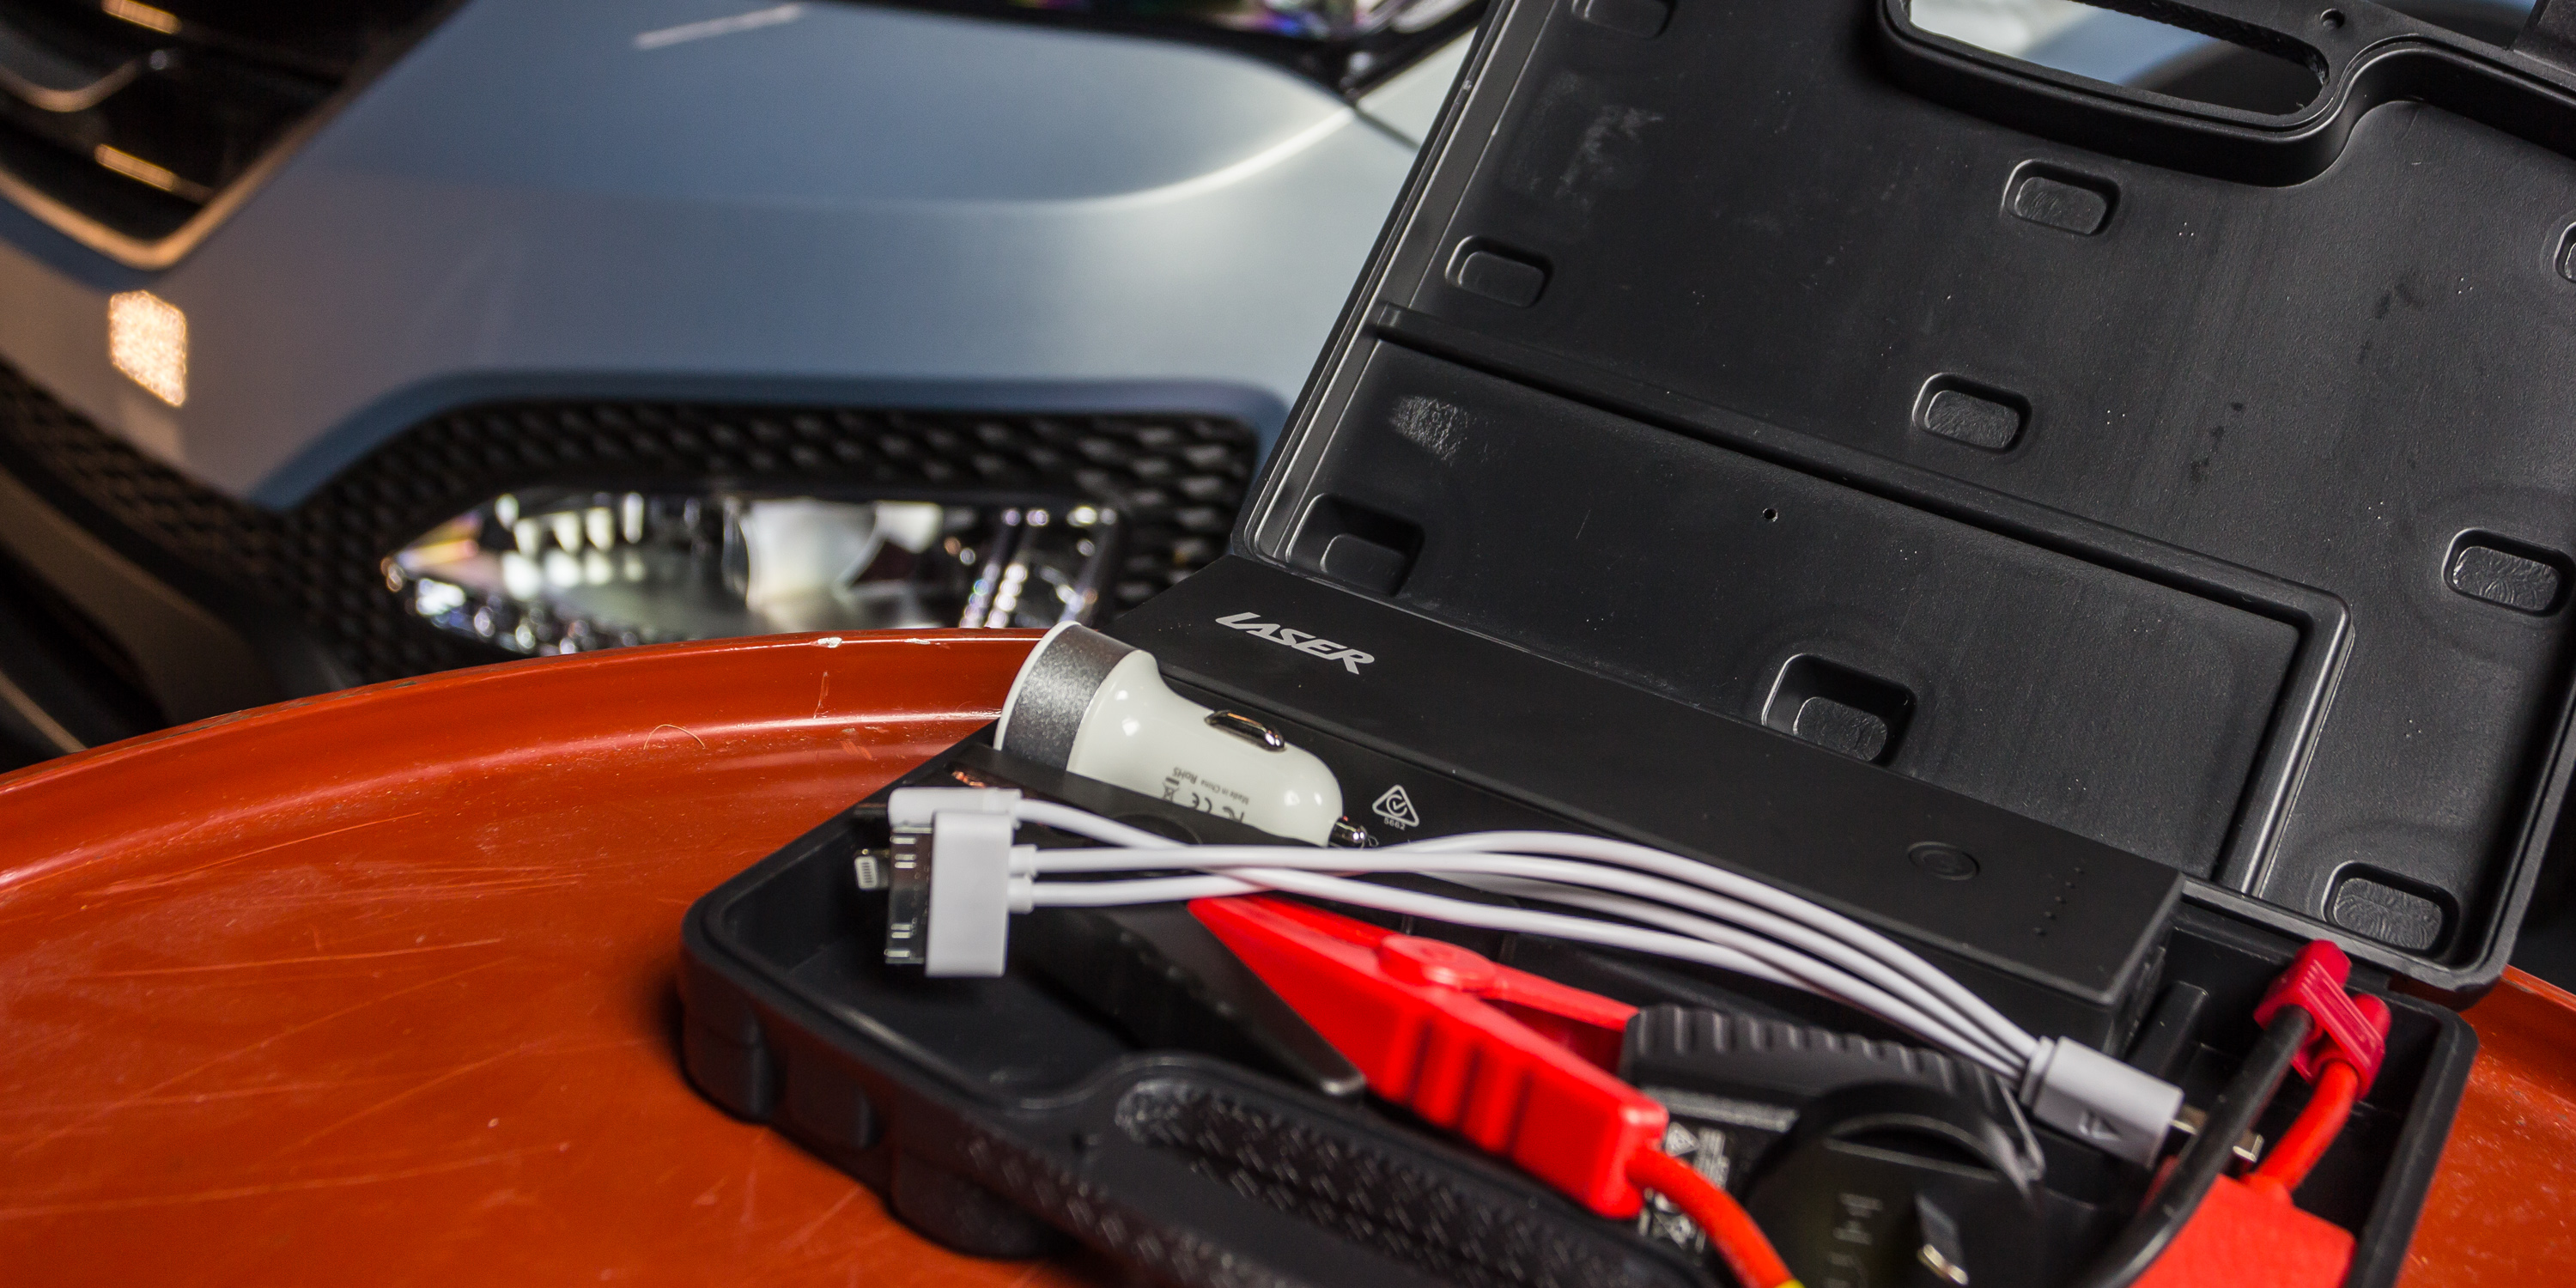 Rebuilding A Laptop Battery Linux Journal | Upcomingcarshq.com